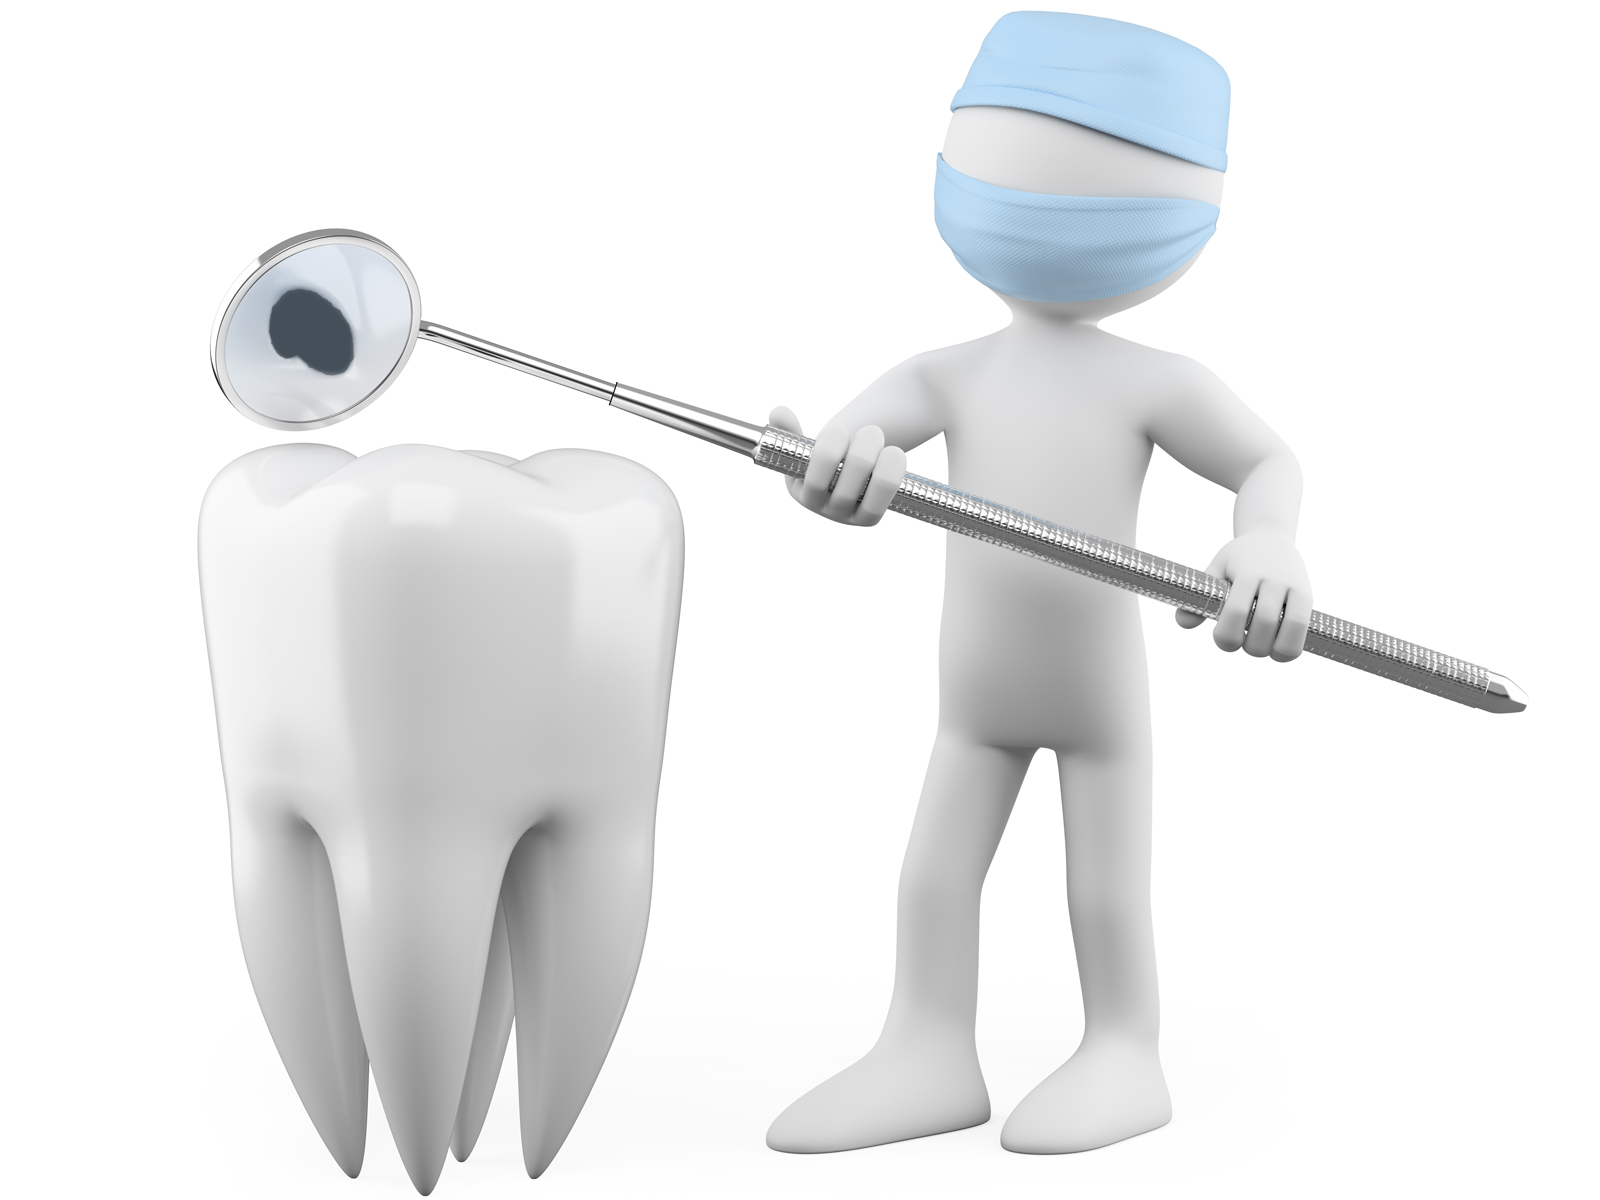 How can I heal a cavity without going to the dentist?